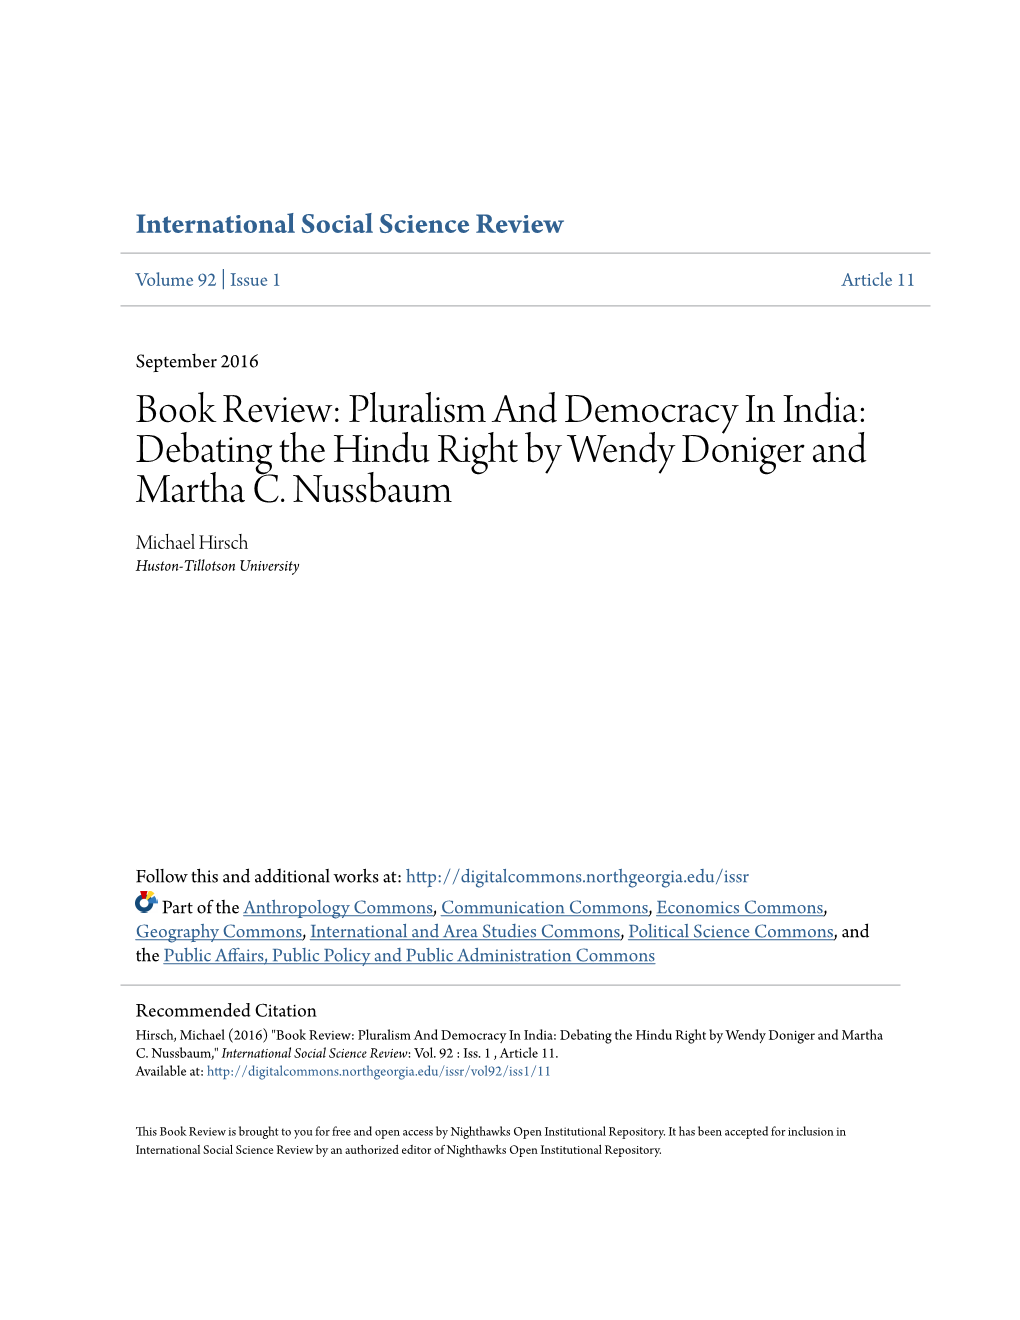 Pluralism and Democracy in India: Debating the Hindu Right by Wendy Doniger and Martha C